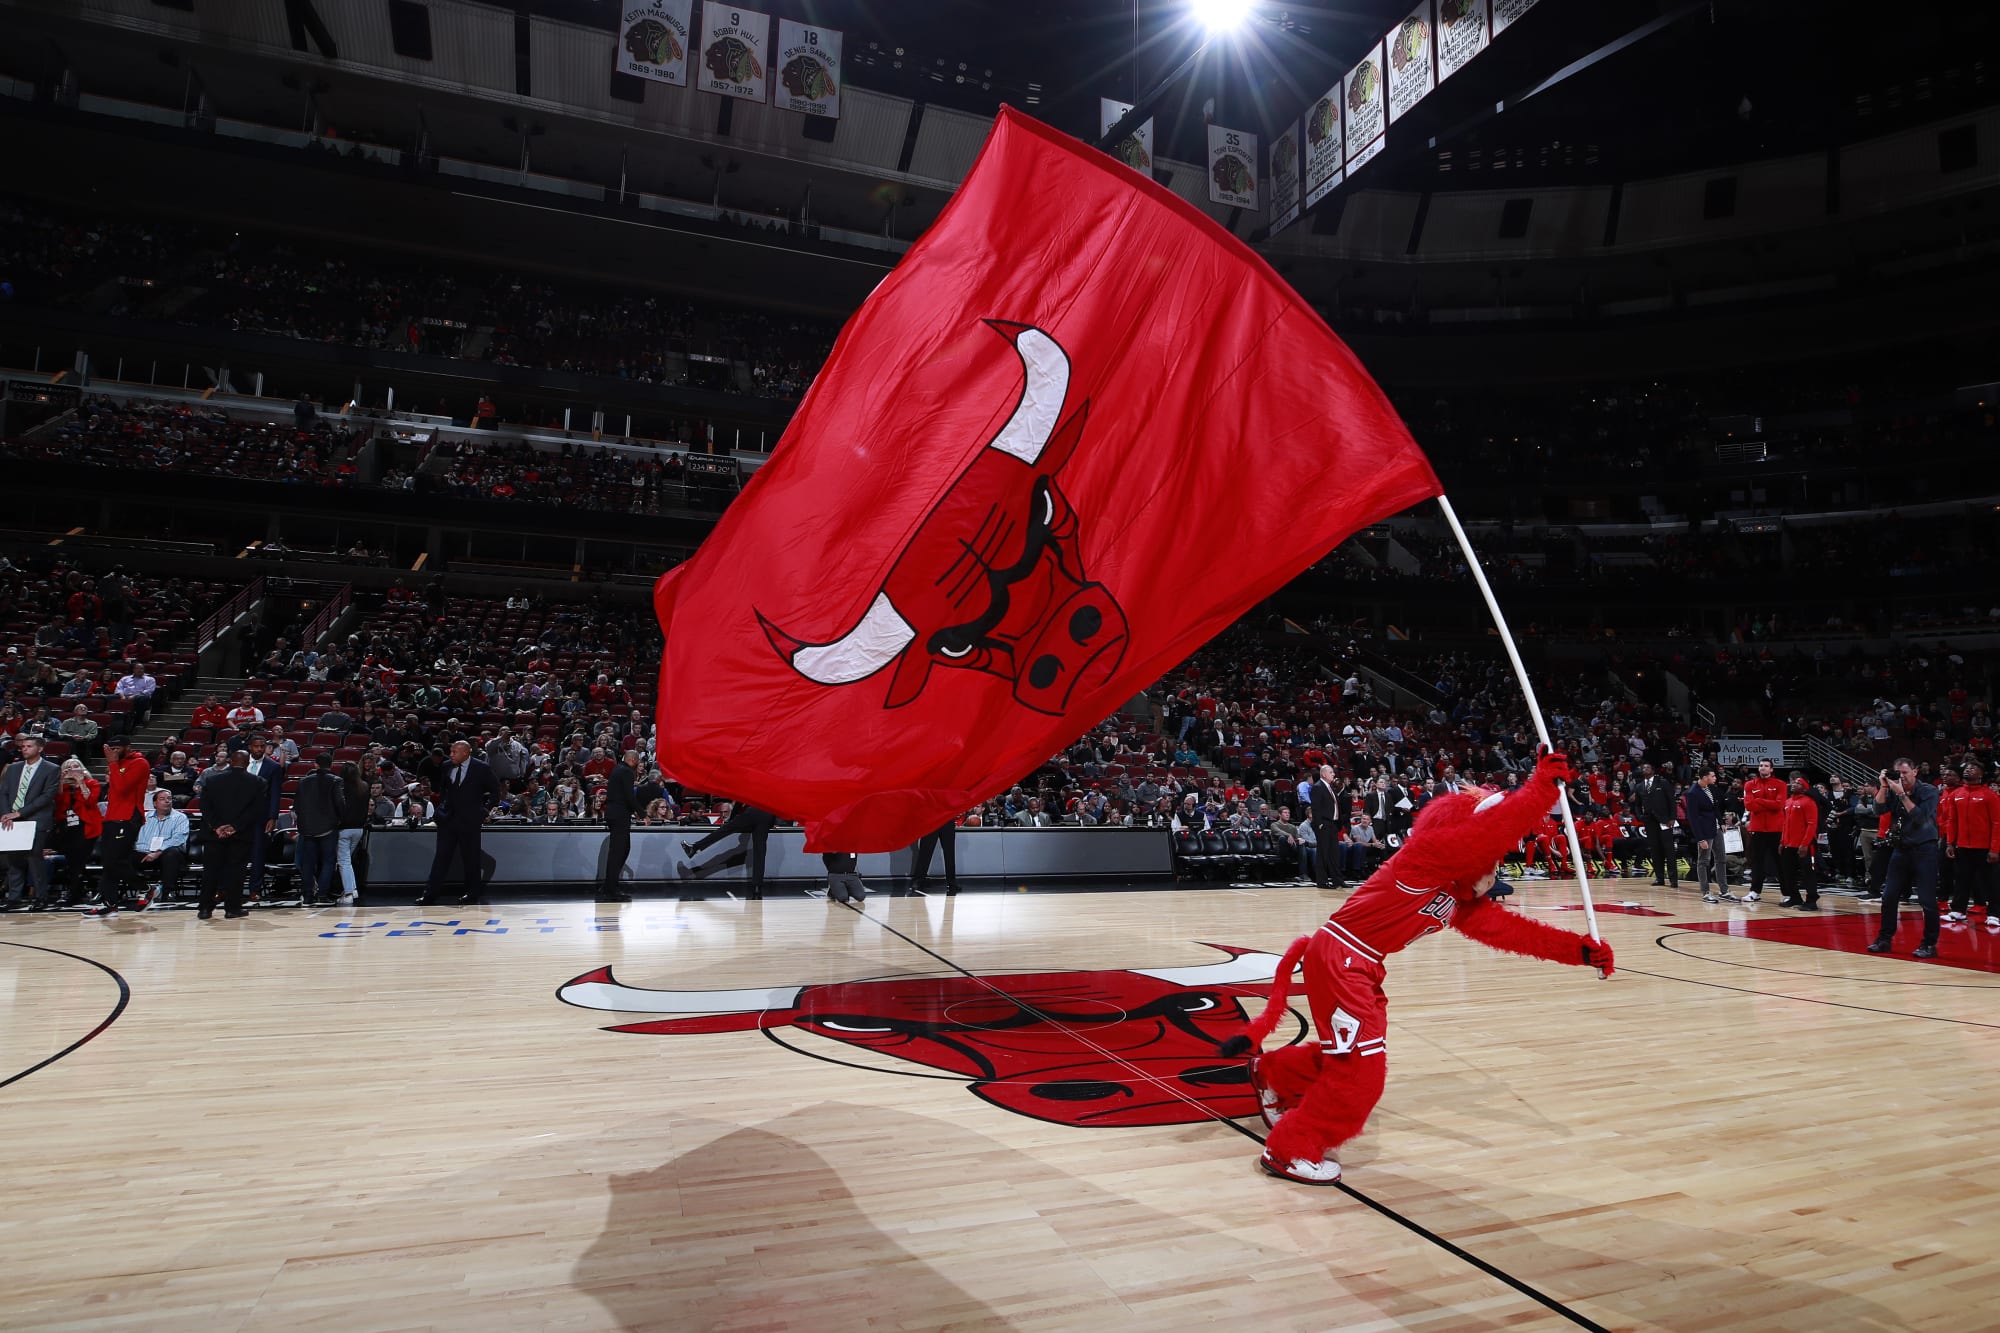 Through eight games, The Chicago Bulls have looked impressive